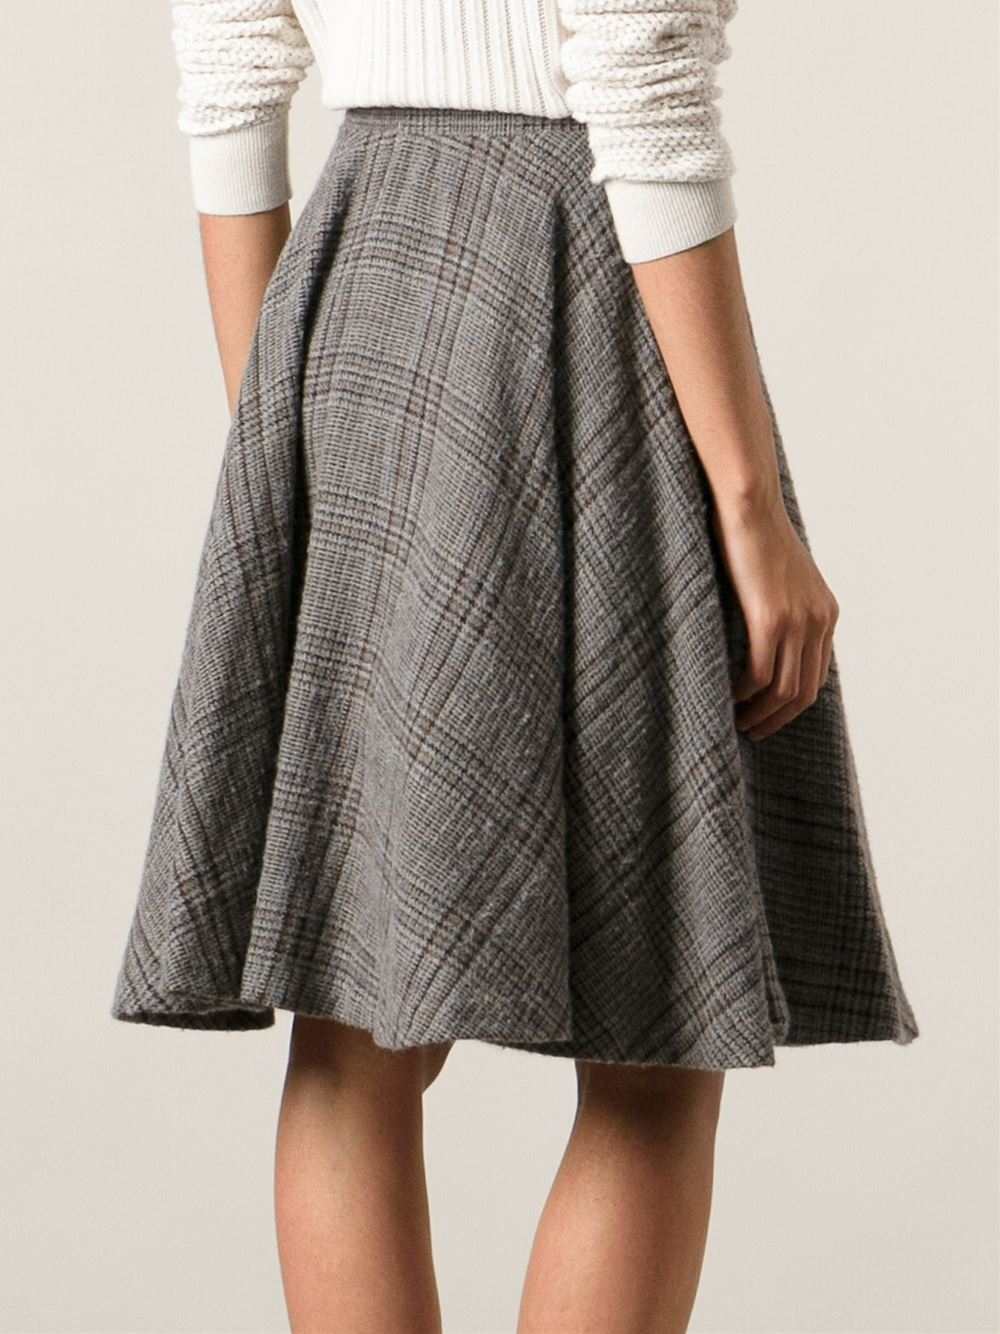 Erika Cavallini Semi Couture A-Line Plaid Skirt in Gray - Lyst